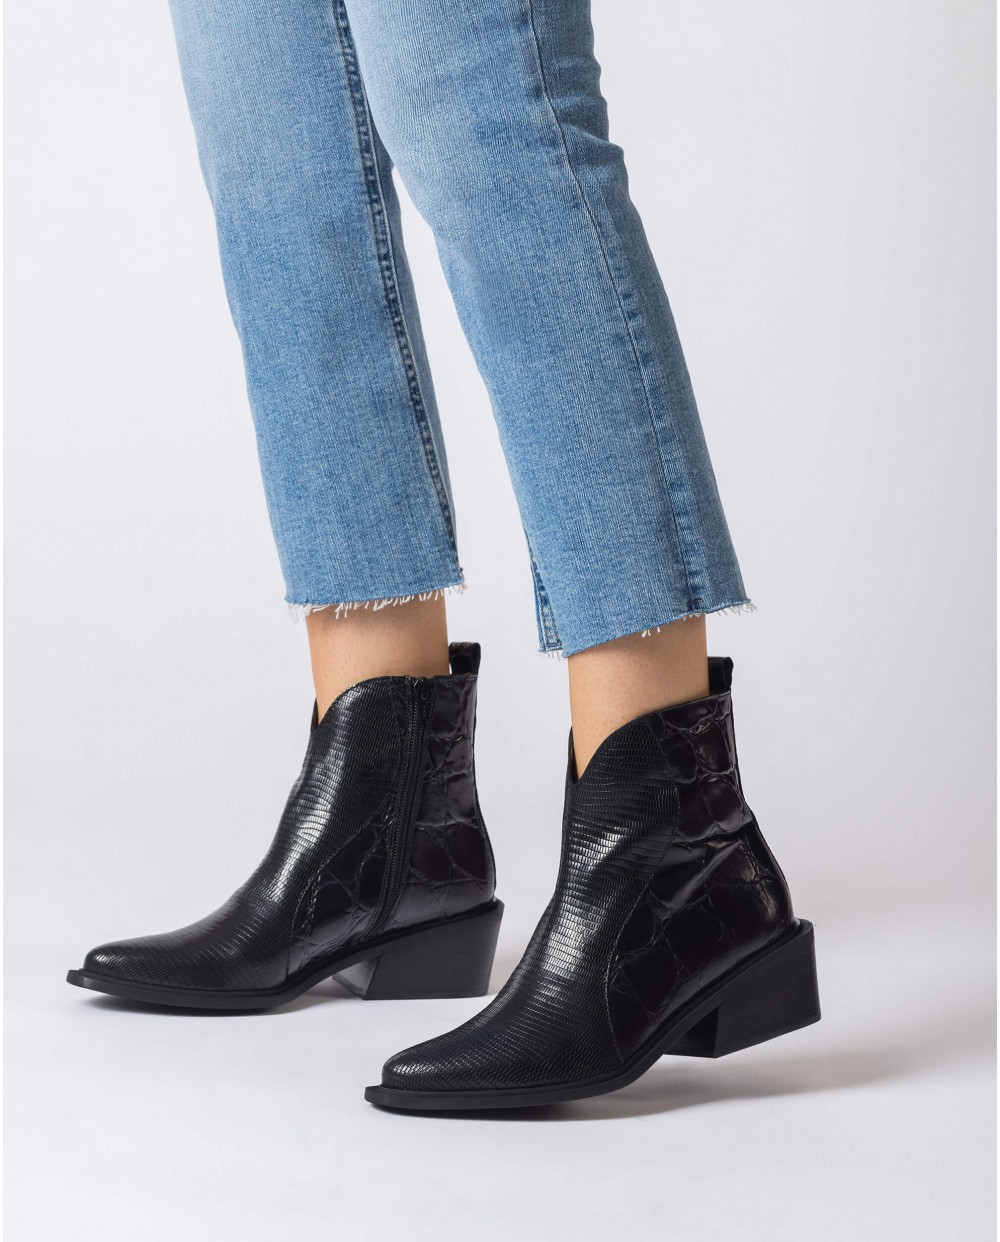 Wonders-Ankle Boots-Black Sacramento Ankle Boot